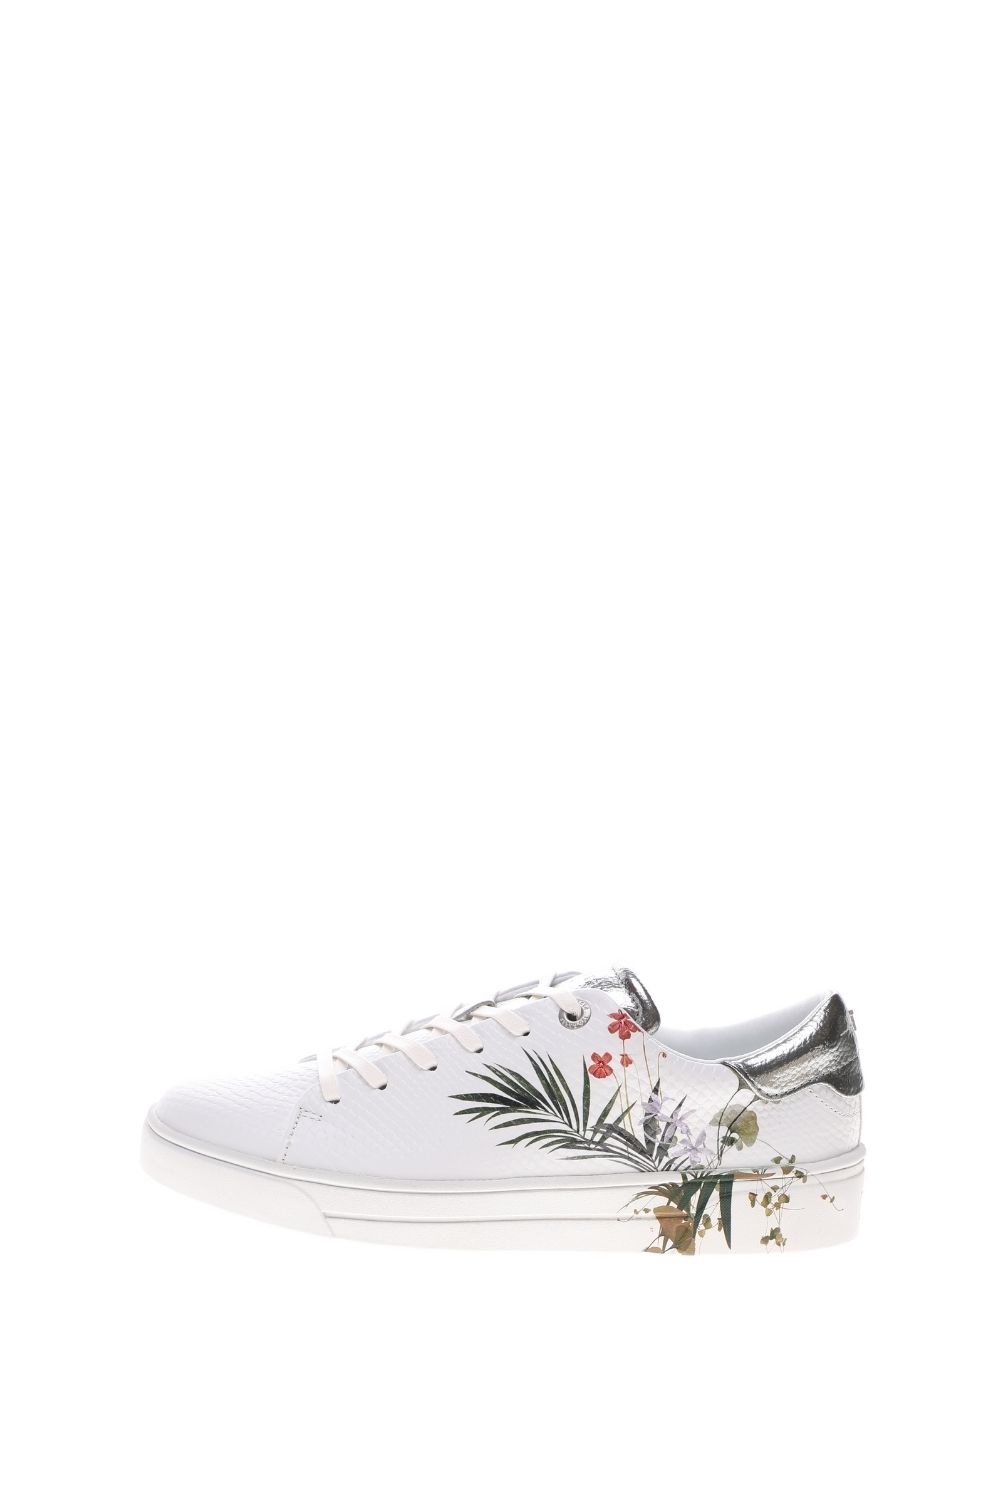 TED BAKER - Γυναικεία sneakers TED BAKER PENIL HIGHLAND EXOTIC DETAIL T λευκά Γυναικεία/Παπούτσια/Sneakers